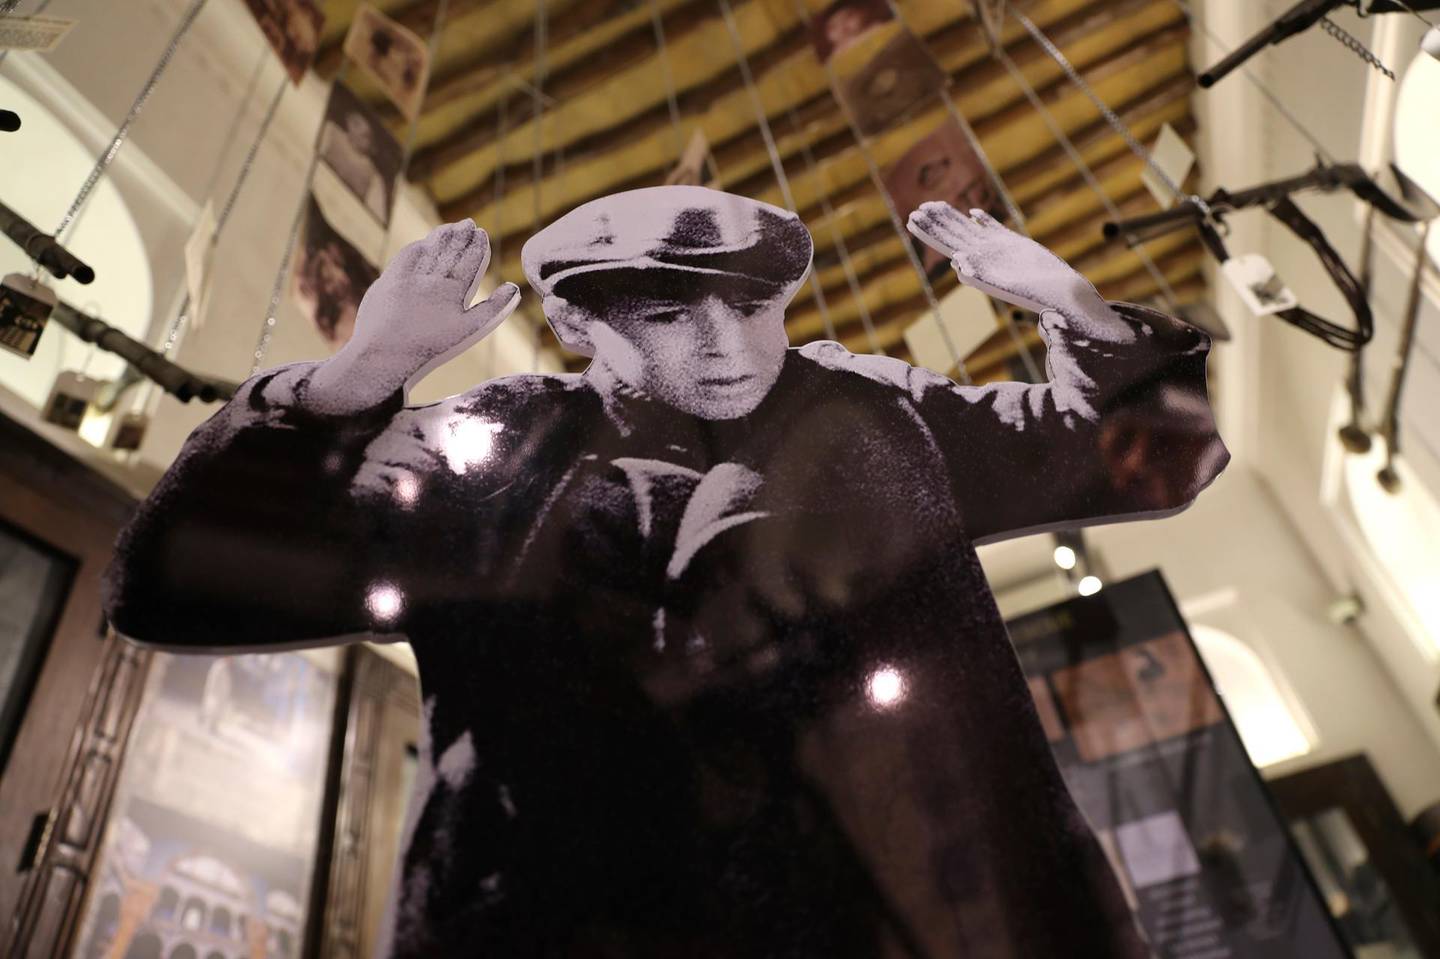 A cardboard cutout of a Jewish boy is presented at the Civilization Museum in Dubai, United Arab Emirates, Wednesday, May 26, 2021. Israel's top diplomat to the United Arab Emirates attended a ceremony in Dubai on the grounds of the Arabian Peninsula's first permanent exhibition to commemorate the Holocaust. Hours earlier, he'd attended an event establishing a joint venture between an Israeli and Emirati company. (AP Photo/Kamran Jebreili)